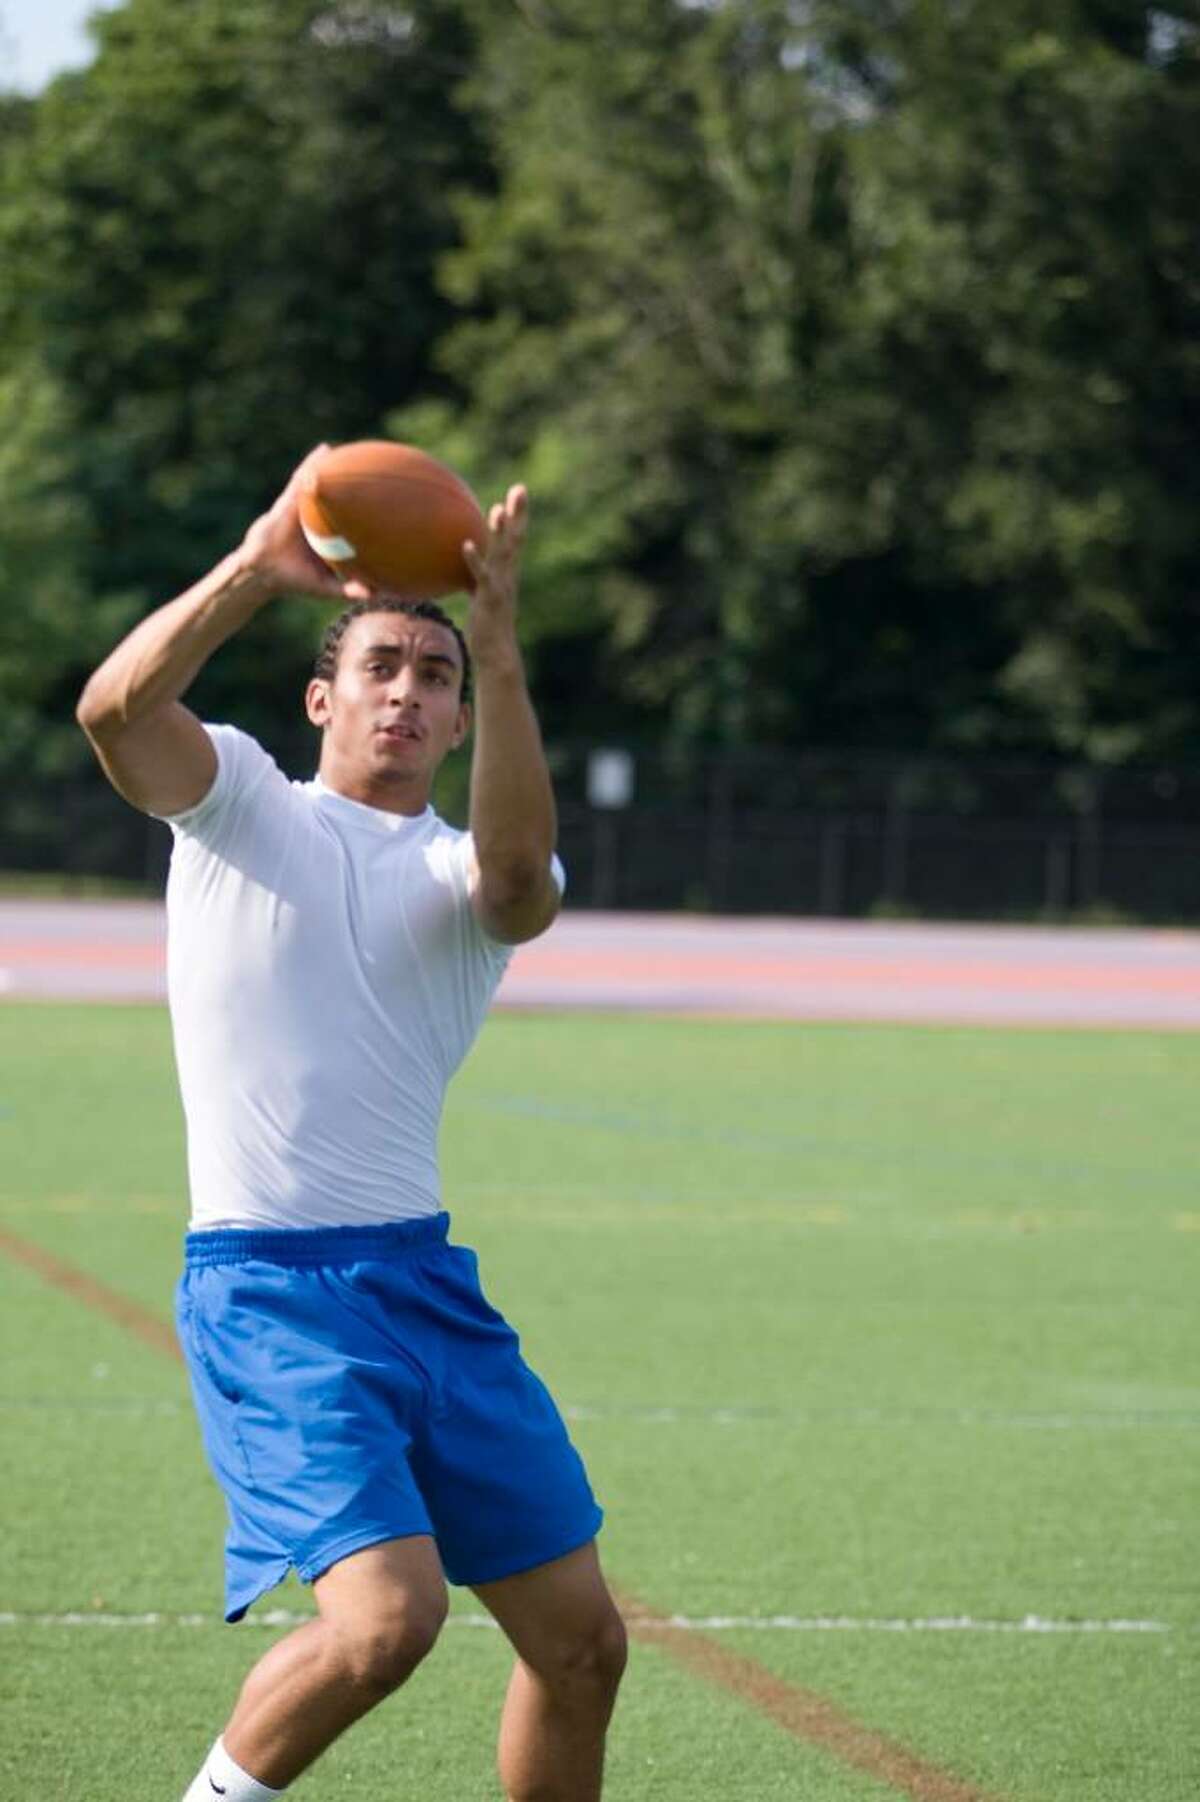 Danbury High receiver Damian Winters grabs a pass during practice.